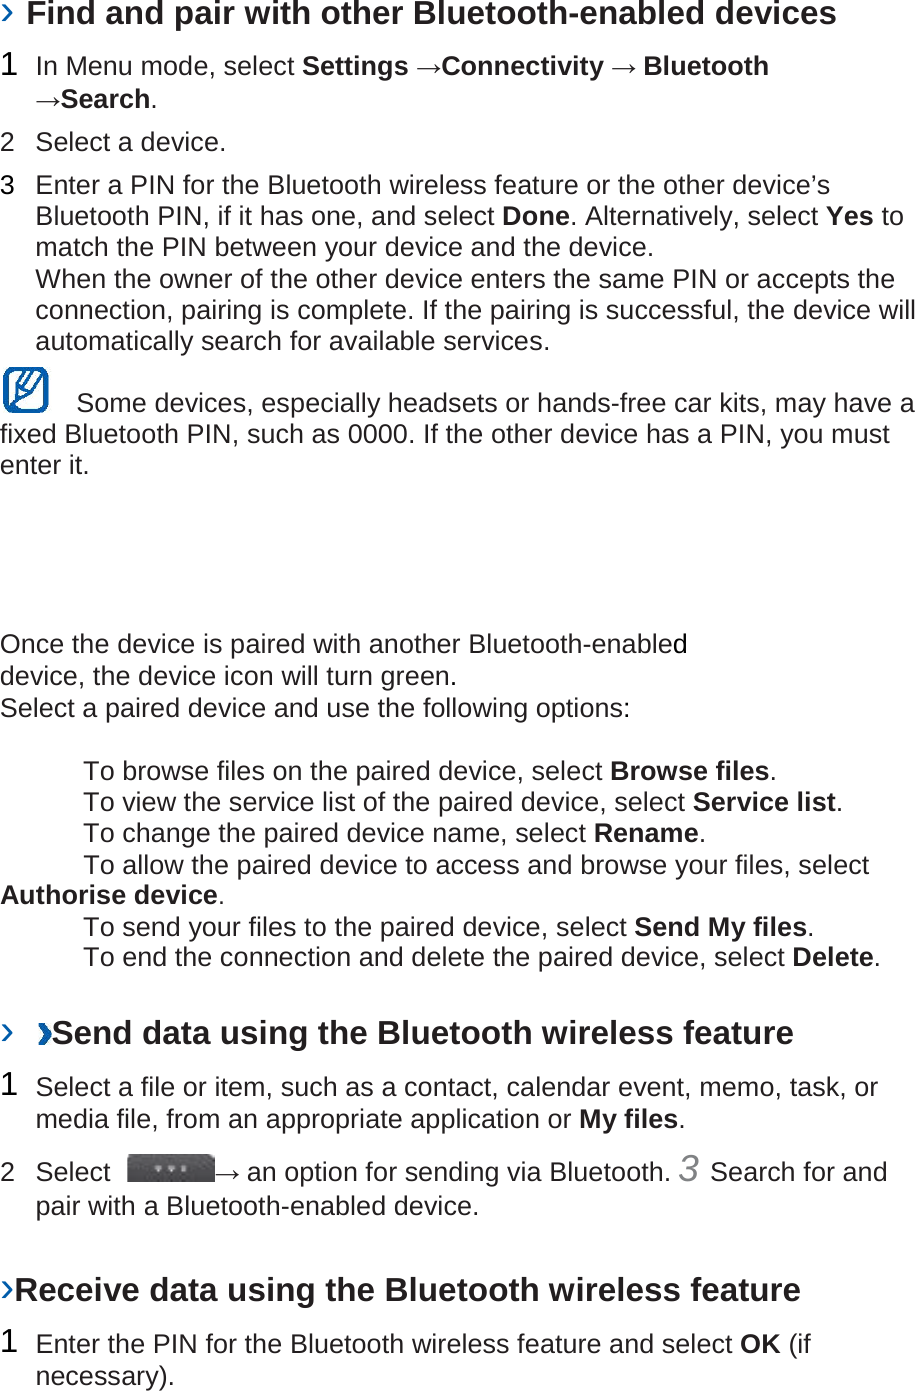 › Find and pair with other Bluetooth-enabled devices   1  In Menu mode, select Settings →Connectivity → Bluetooth →Search.   2  Select a device.   3  Enter a PIN for the Bluetooth wireless feature or the other device’s Bluetooth PIN, if it has one, and select Done. Alternatively, select Yes to match the PIN between your device and the device.   When the owner of the other device enters the same PIN or accepts the connection, pairing is complete. If the pairing is successful, the device will automatically search for available services.    Some devices, especially headsets or hands-free car kits, may have a fixed Bluetooth PIN, such as 0000. If the other device has a PIN, you must enter it.   Once the device is paired with another Bluetooth-enabled device, the device icon will turn green. Select a paired device and use the following options:    To browse files on the paired device, select Browse files.     To view the service list of the paired device, select Service list.    To change the paired device name, select Rename.    To allow the paired device to access and browse your files, select Authorise device.    To send your files to the paired device, select Send My files.    To end the connection and delete the paired device, select Delete.    ›  Send data using the Bluetooth wireless feature   1  Select a file or item, such as a contact, calendar event, memo, task, or media file, from an appropriate application or My files.   2  Select  → an option for sending via Bluetooth. 3 Search for and pair with a Bluetooth-enabled device.   ›Receive data using the Bluetooth wireless feature   1  Enter the PIN for the Bluetooth wireless feature and select OK (if necessary).   